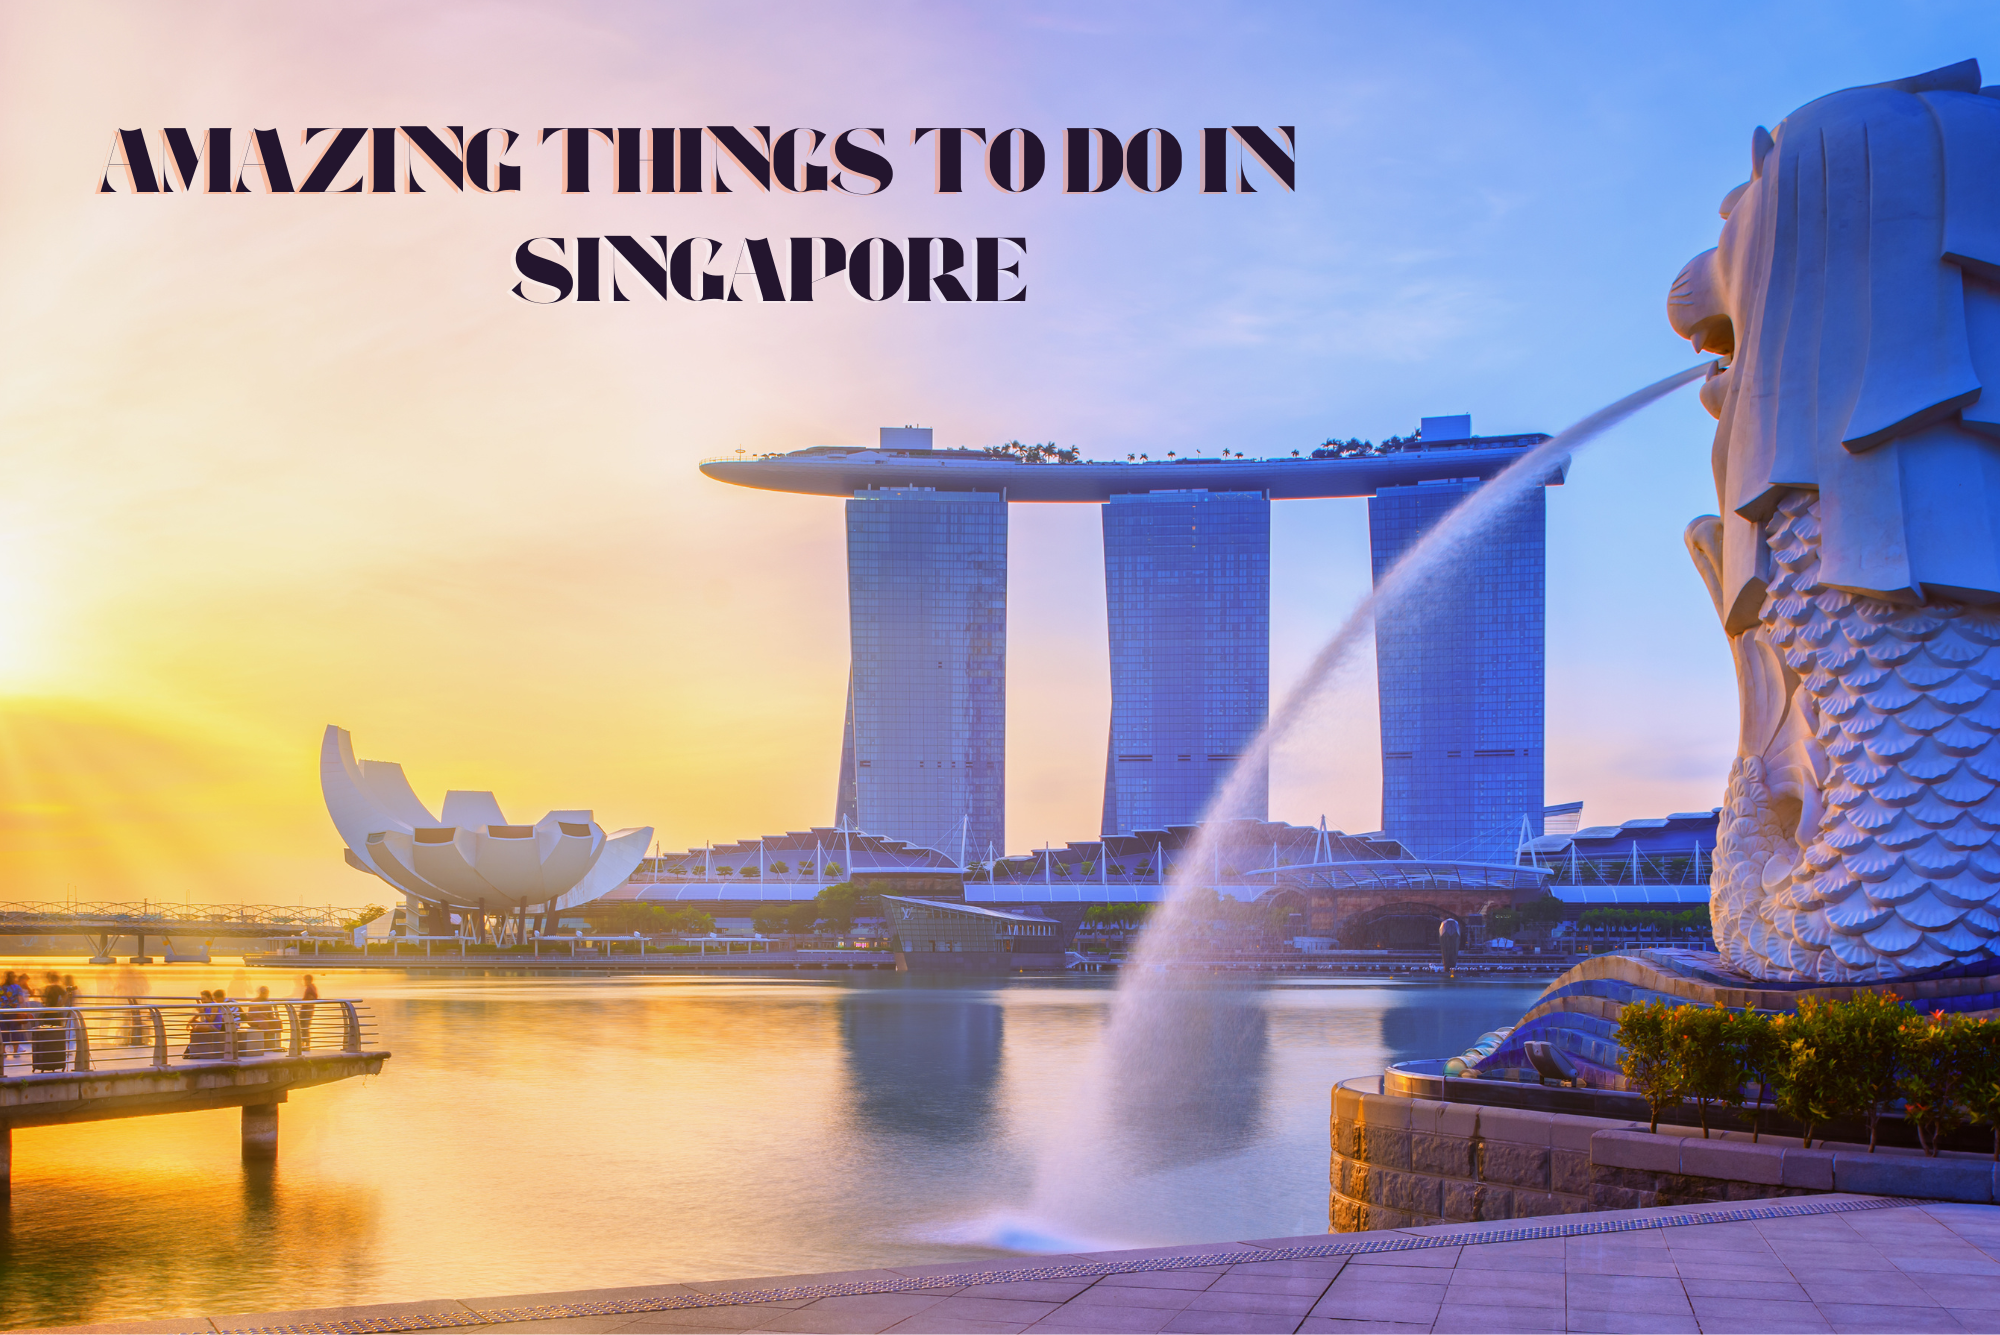 Discover the magic of Singapore's skyline at Gardens by the Bay. A must-visit as part of the amazing things to do in this vibrant city.